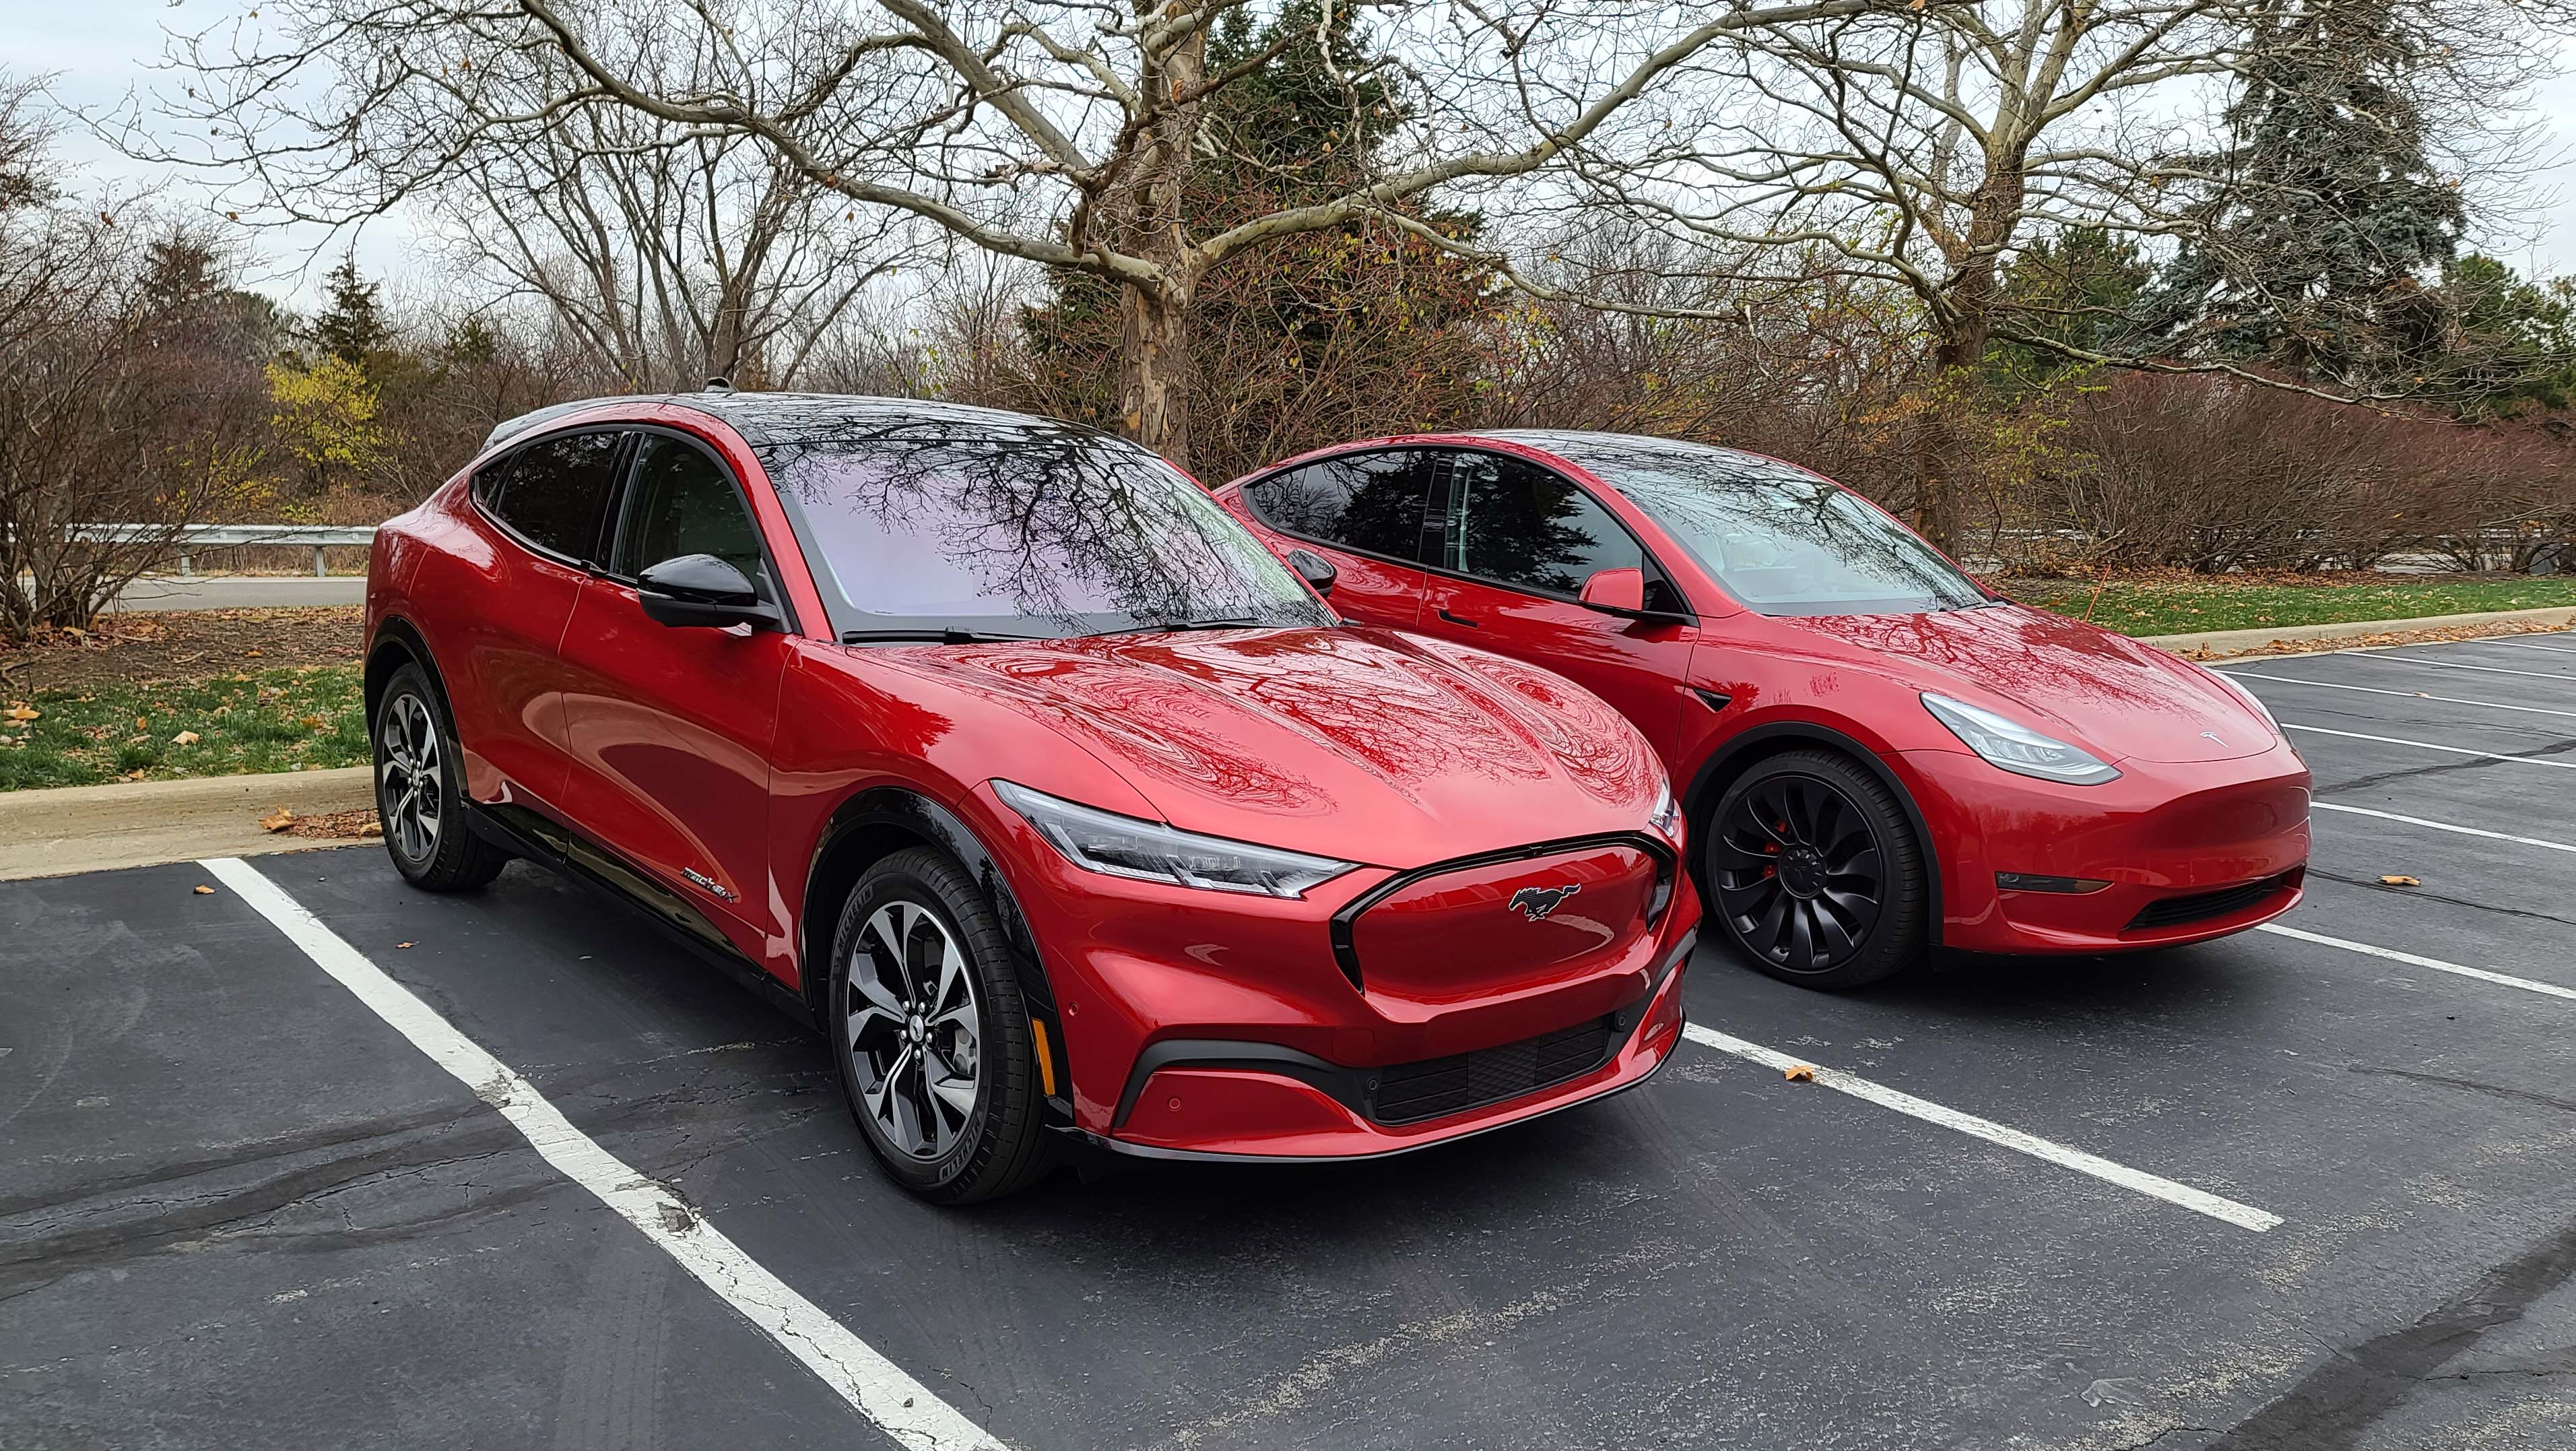 The 2021 Ford Mustang Mach-E (left) tracks the Tesla Model Y spec-for-spec. 300-mile range battery, 15-inch center screen, AWD SUV, with a starting price in the high-$40,000s.